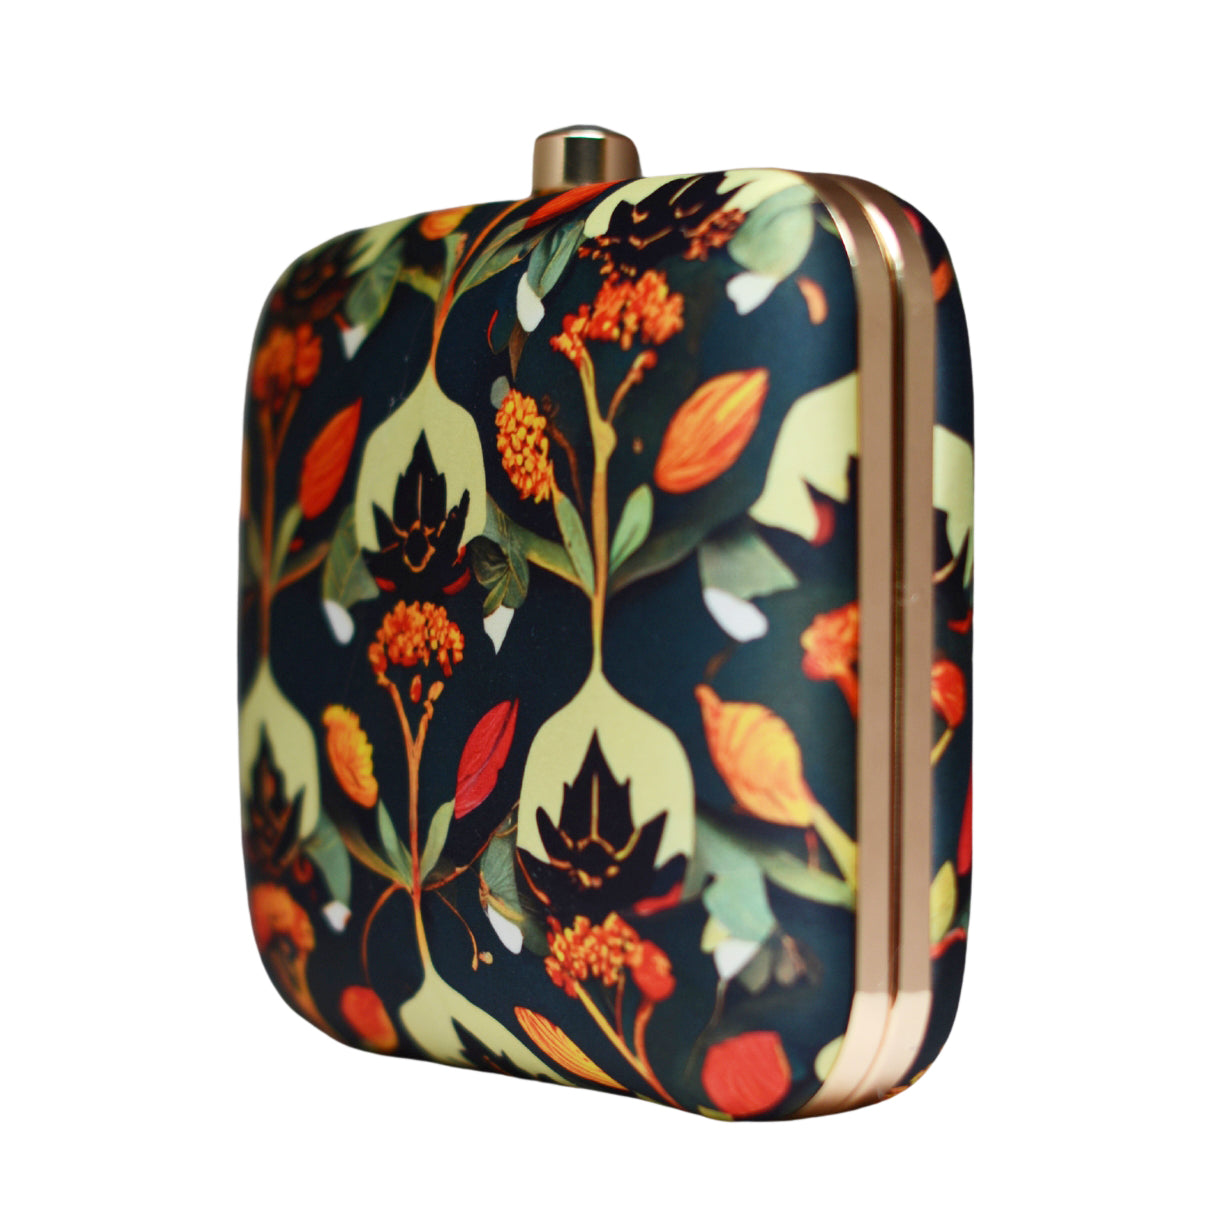 Patterned Floral Printed Clutch